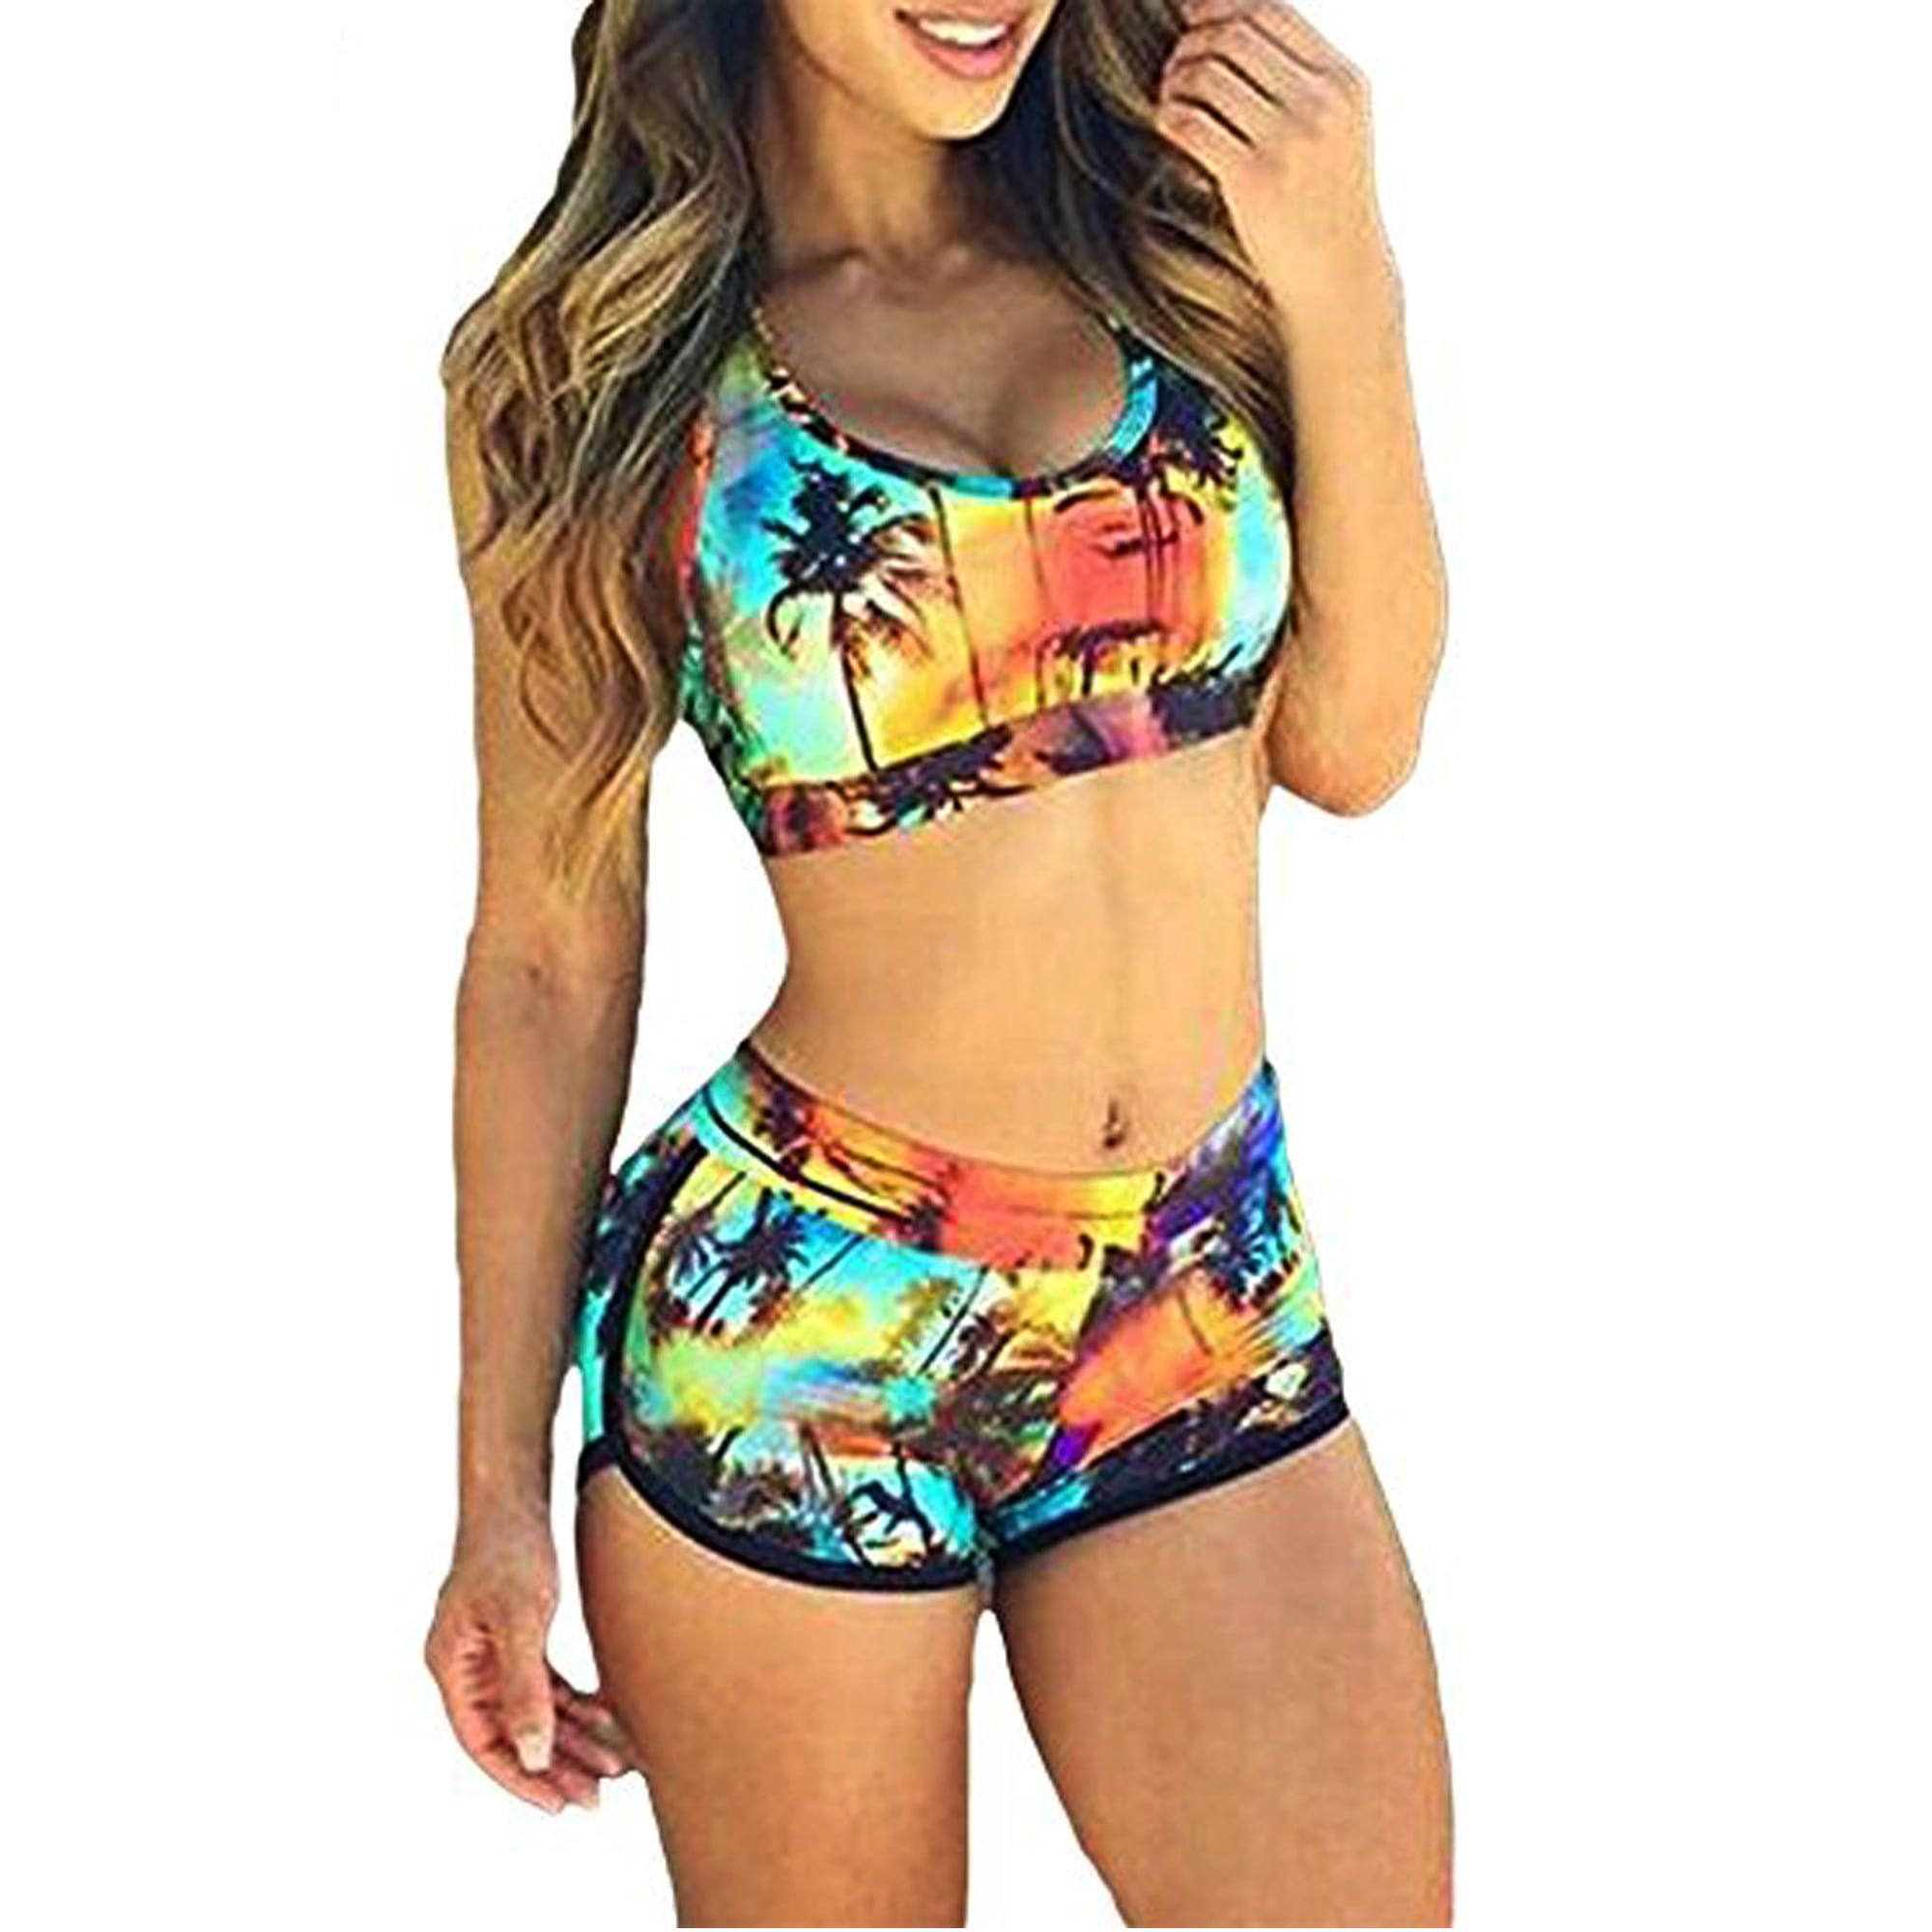 CMTOP Bikinis Set Swimsuit High Waisted Split Bow Swimwear Shorts-Style Swimming Costume Bathing Suits Two Piece Crop Tops Clothes Shorts Halter Neck Bra Chest Pad Womens Ladies